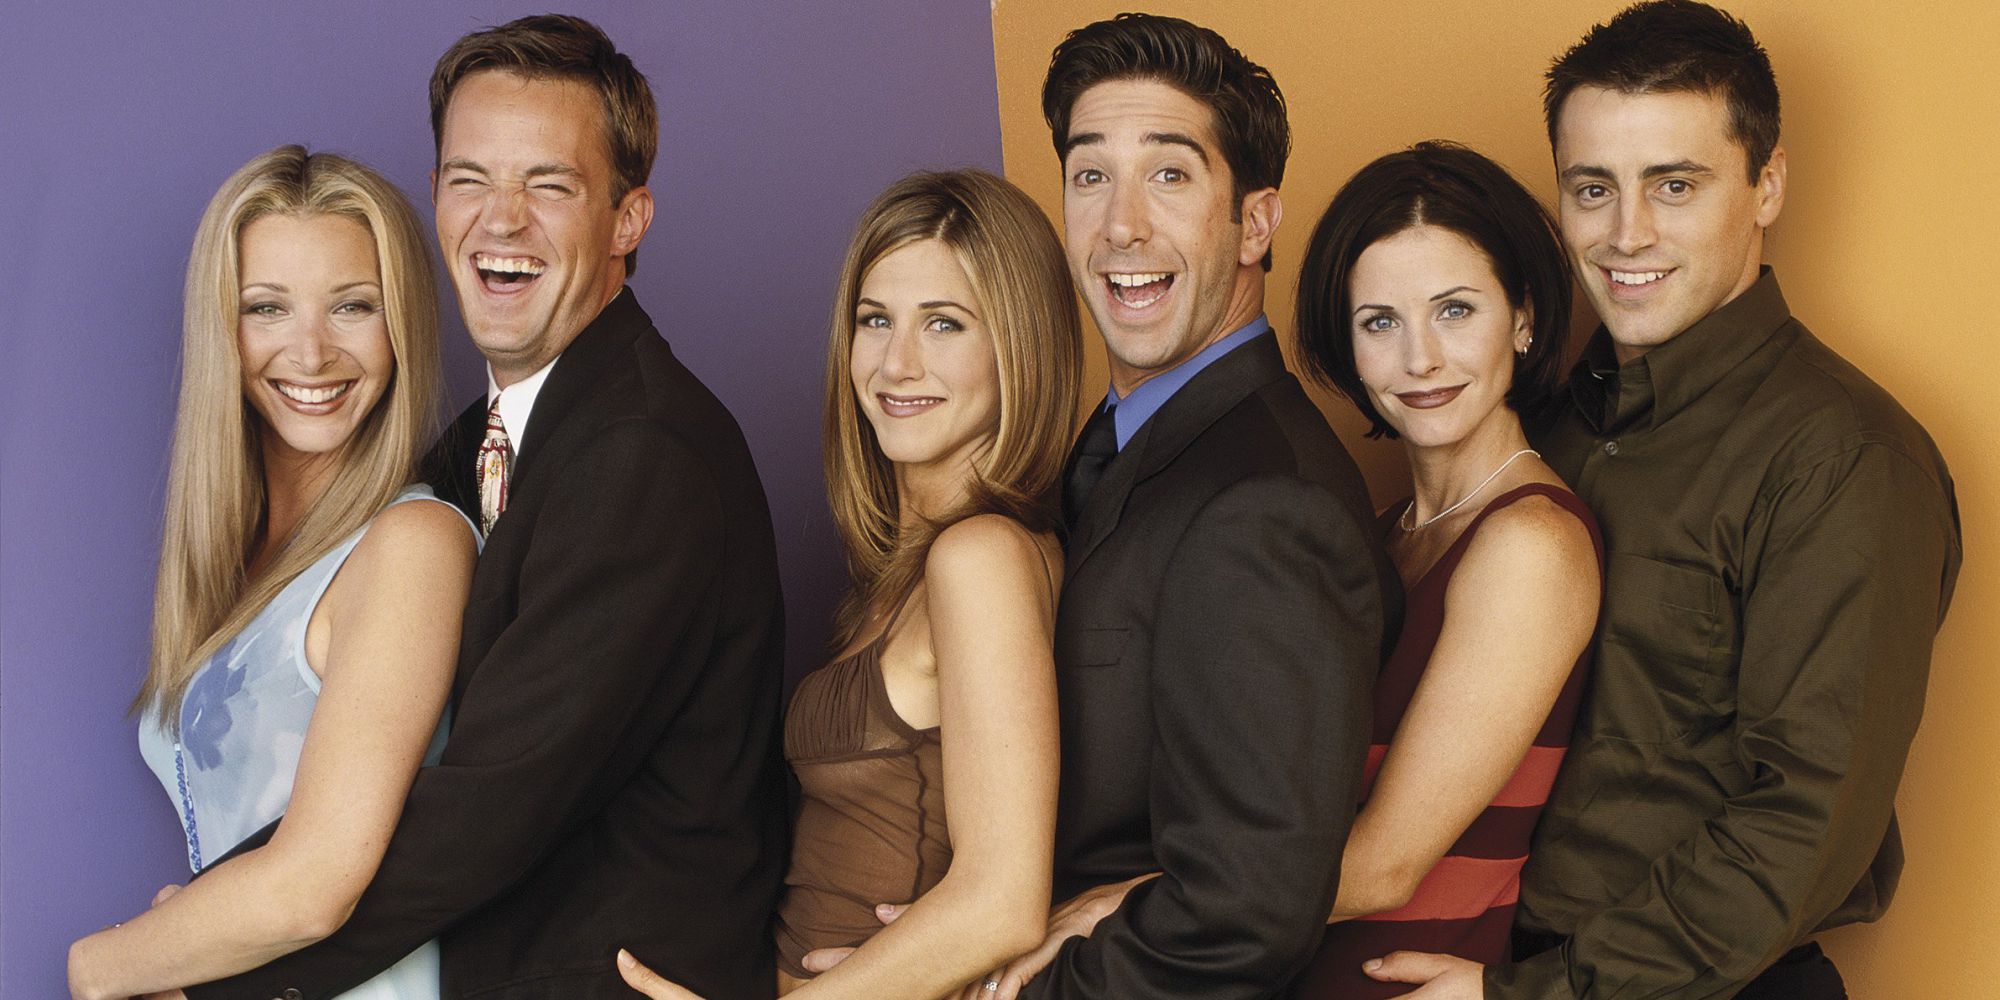 The cast of Friends posing for a promo photo.